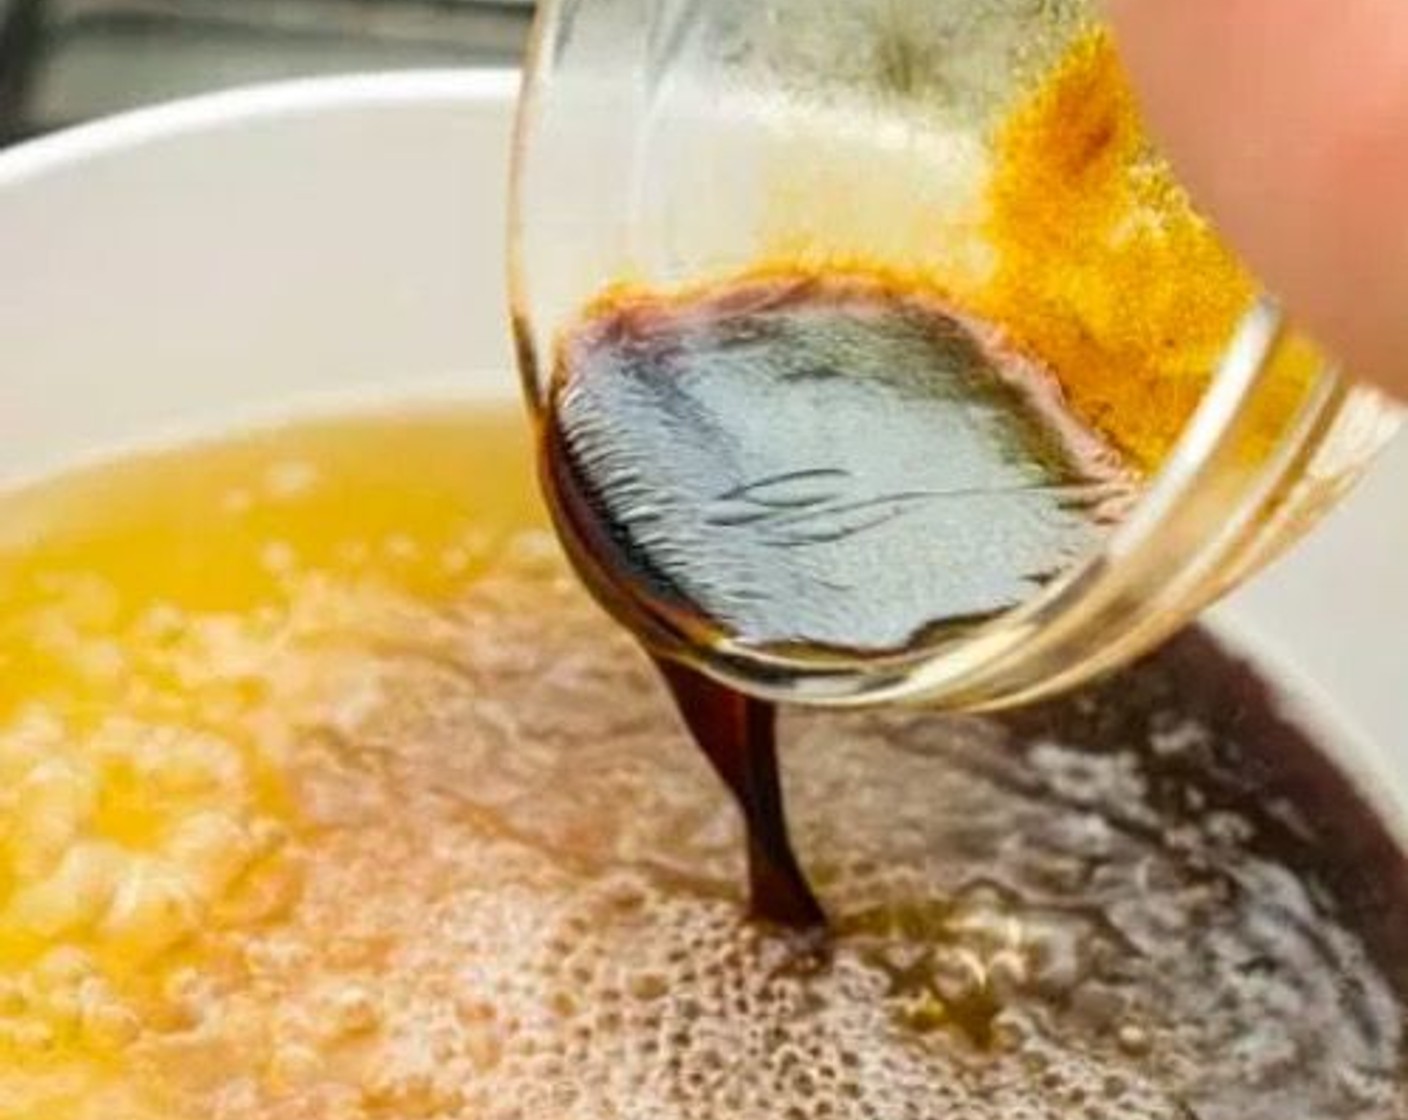 step 5 In a small bowl, combine Apple Cider Vinegar (1/2 cup), Soy Sauce (2 Tbsp), Brown Sugar (1 Tbsp), Sesame Oil (1 Tbsp), and Dark Soy Sauce (1 tsp). Pour this sauce mixture into the pot of chicken stock.